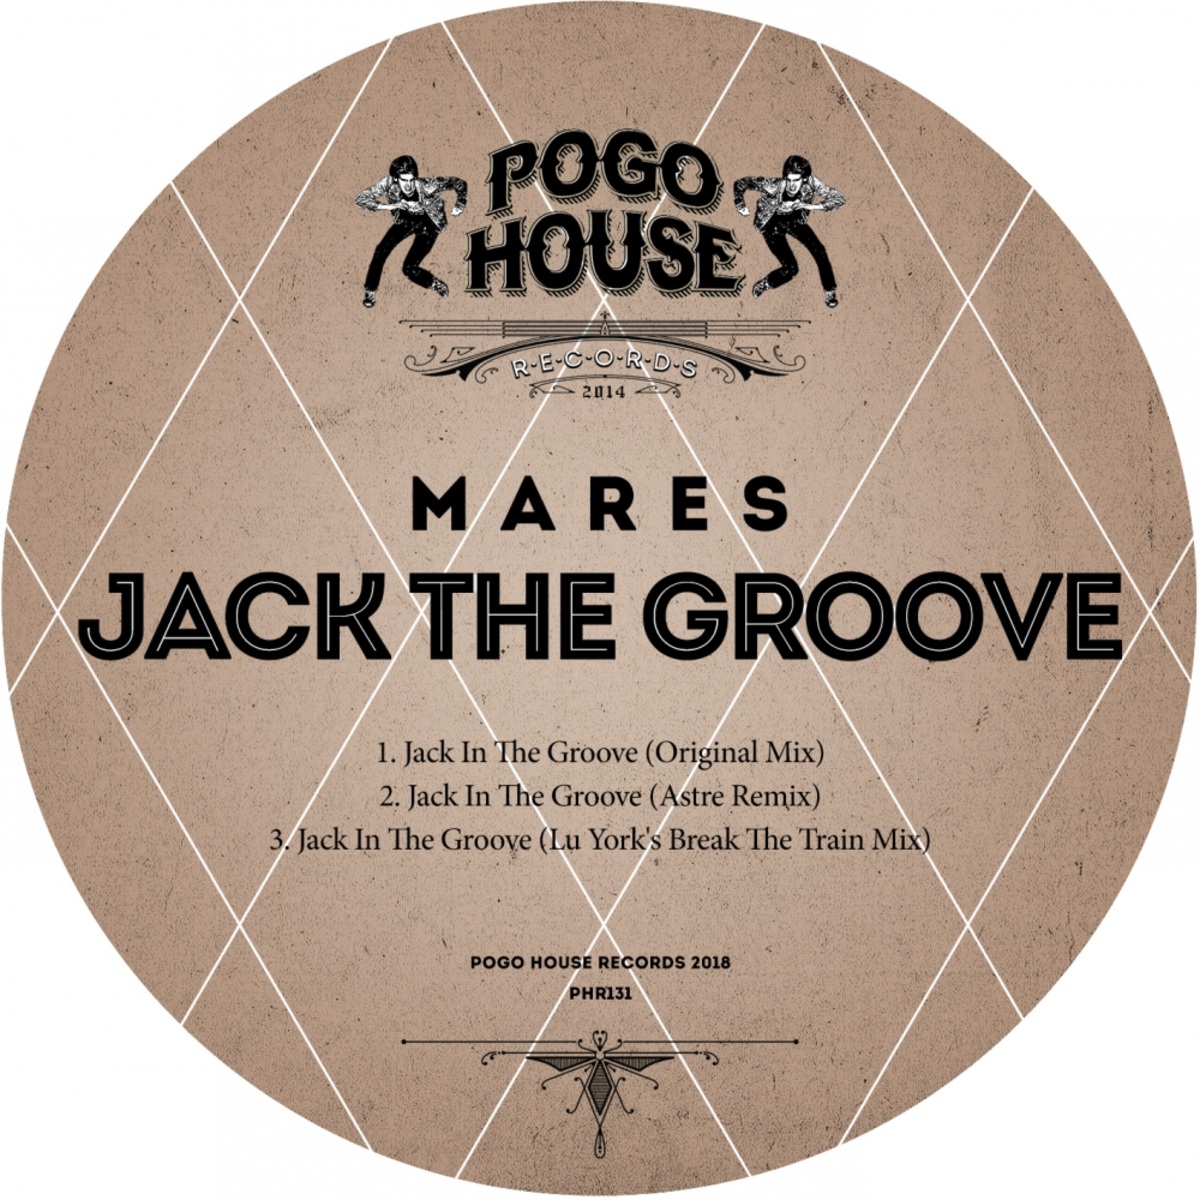 Mares - Jack The Groove / Pogo House Records